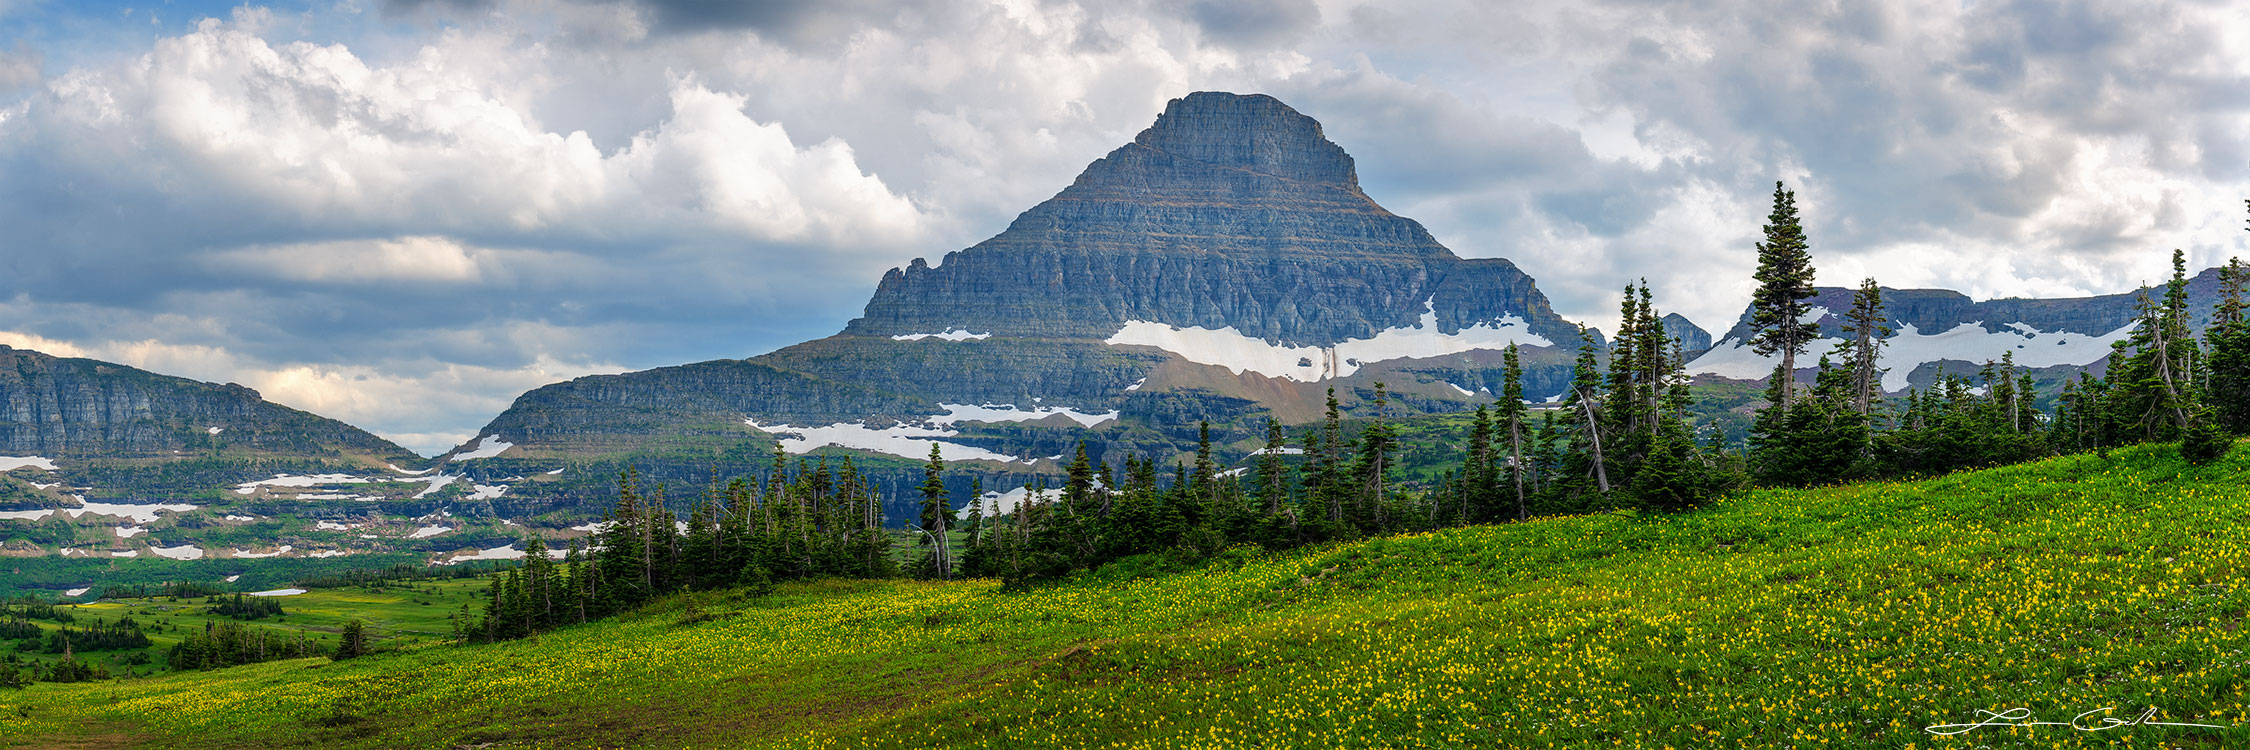 An alpine meadow with yellow wildflowers, pine trees and a beautiful mountain in Glacier National Park, Montana - Gintchin Fine Art